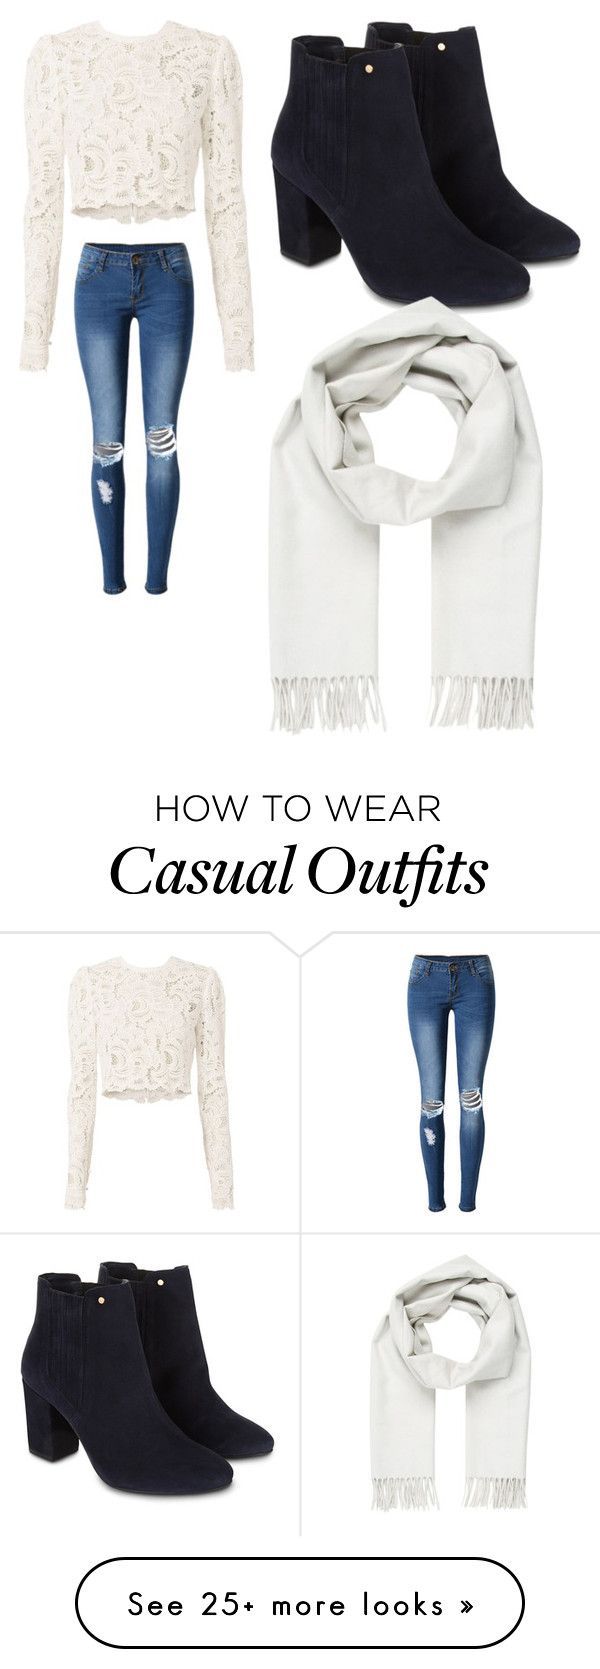 “casual look” by charlenebrady on Polyvore featuring A.L.C., WithChic, Monsoon and Brioni